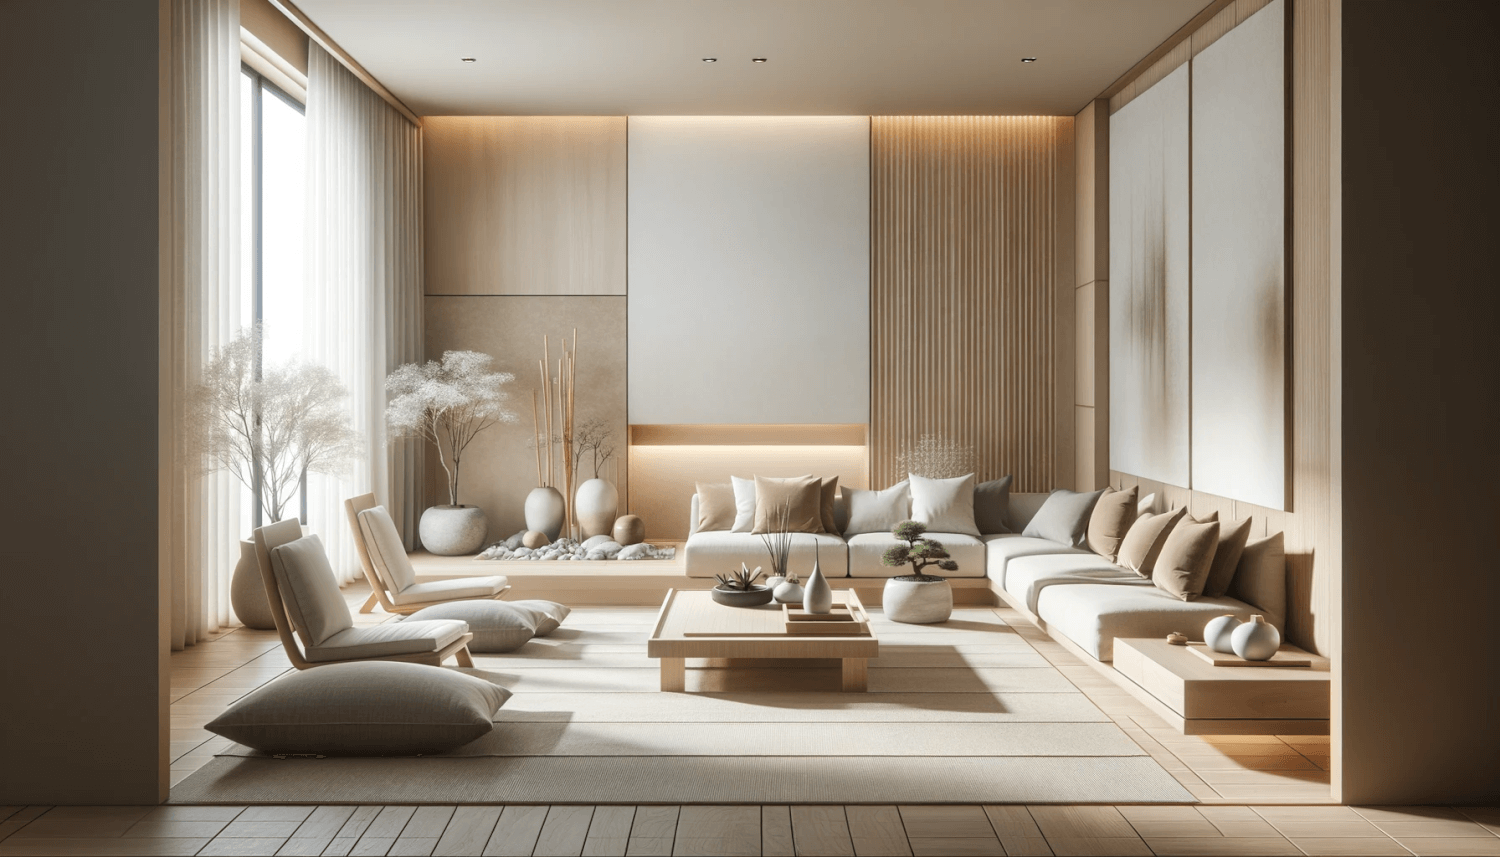 a living room designed with a zen style